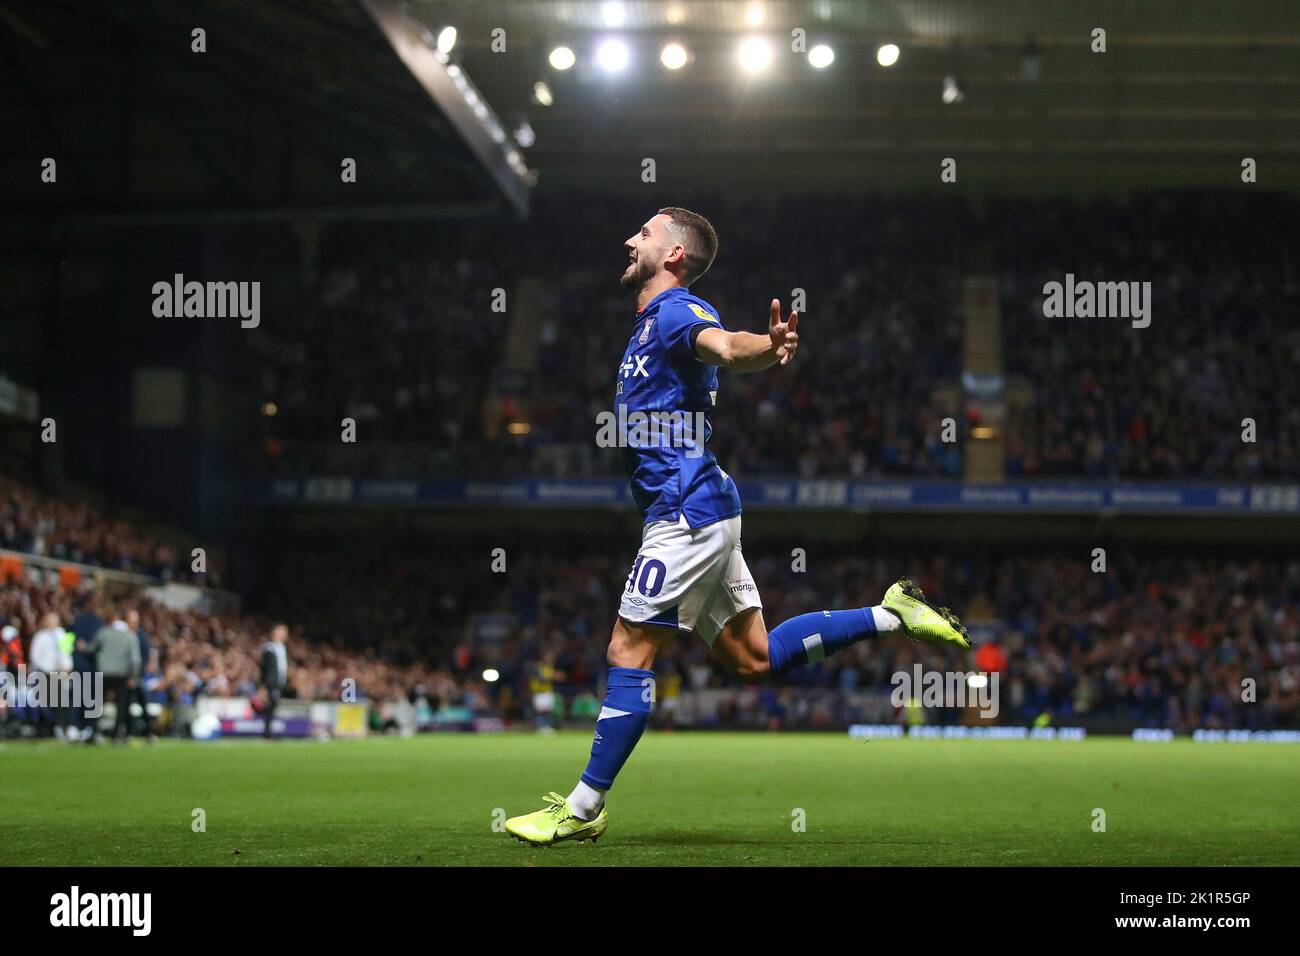 Conor Chaplin of Ipswich Town celebrates after scoring a goal to make it 1-0 - Ipswich Town v Bristol Rovers, Sky Bet League One, Portman Road, Ipswich, UK - 13th September 2022  Editorial Use Only - DataCo restrictions apply Stock Photo